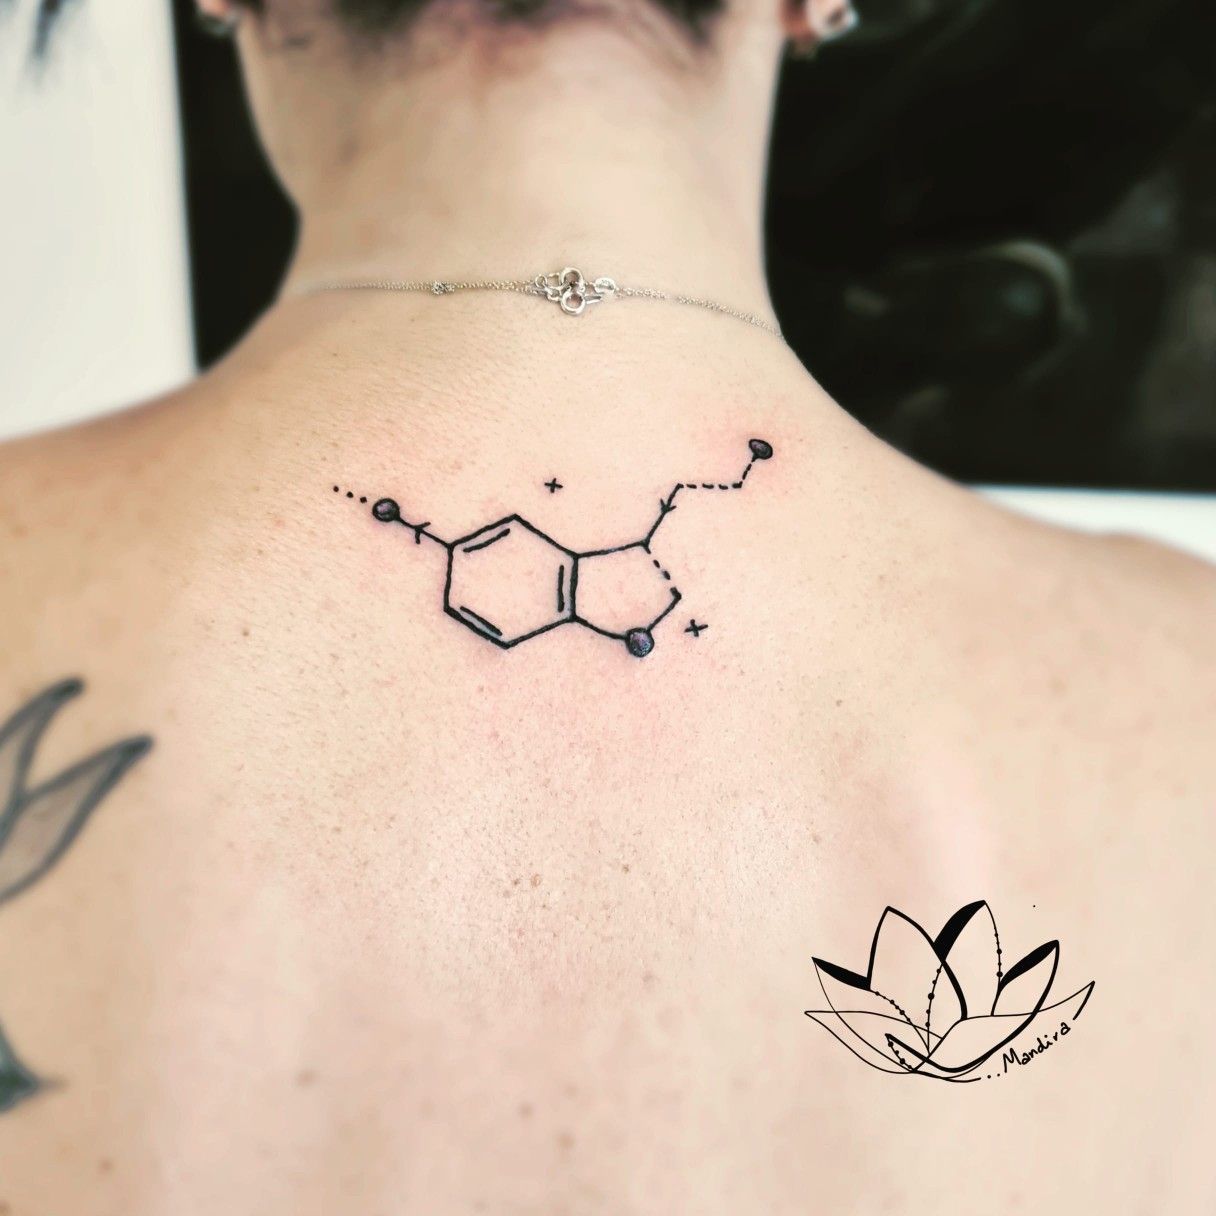 acetylcholine tattoo meaning